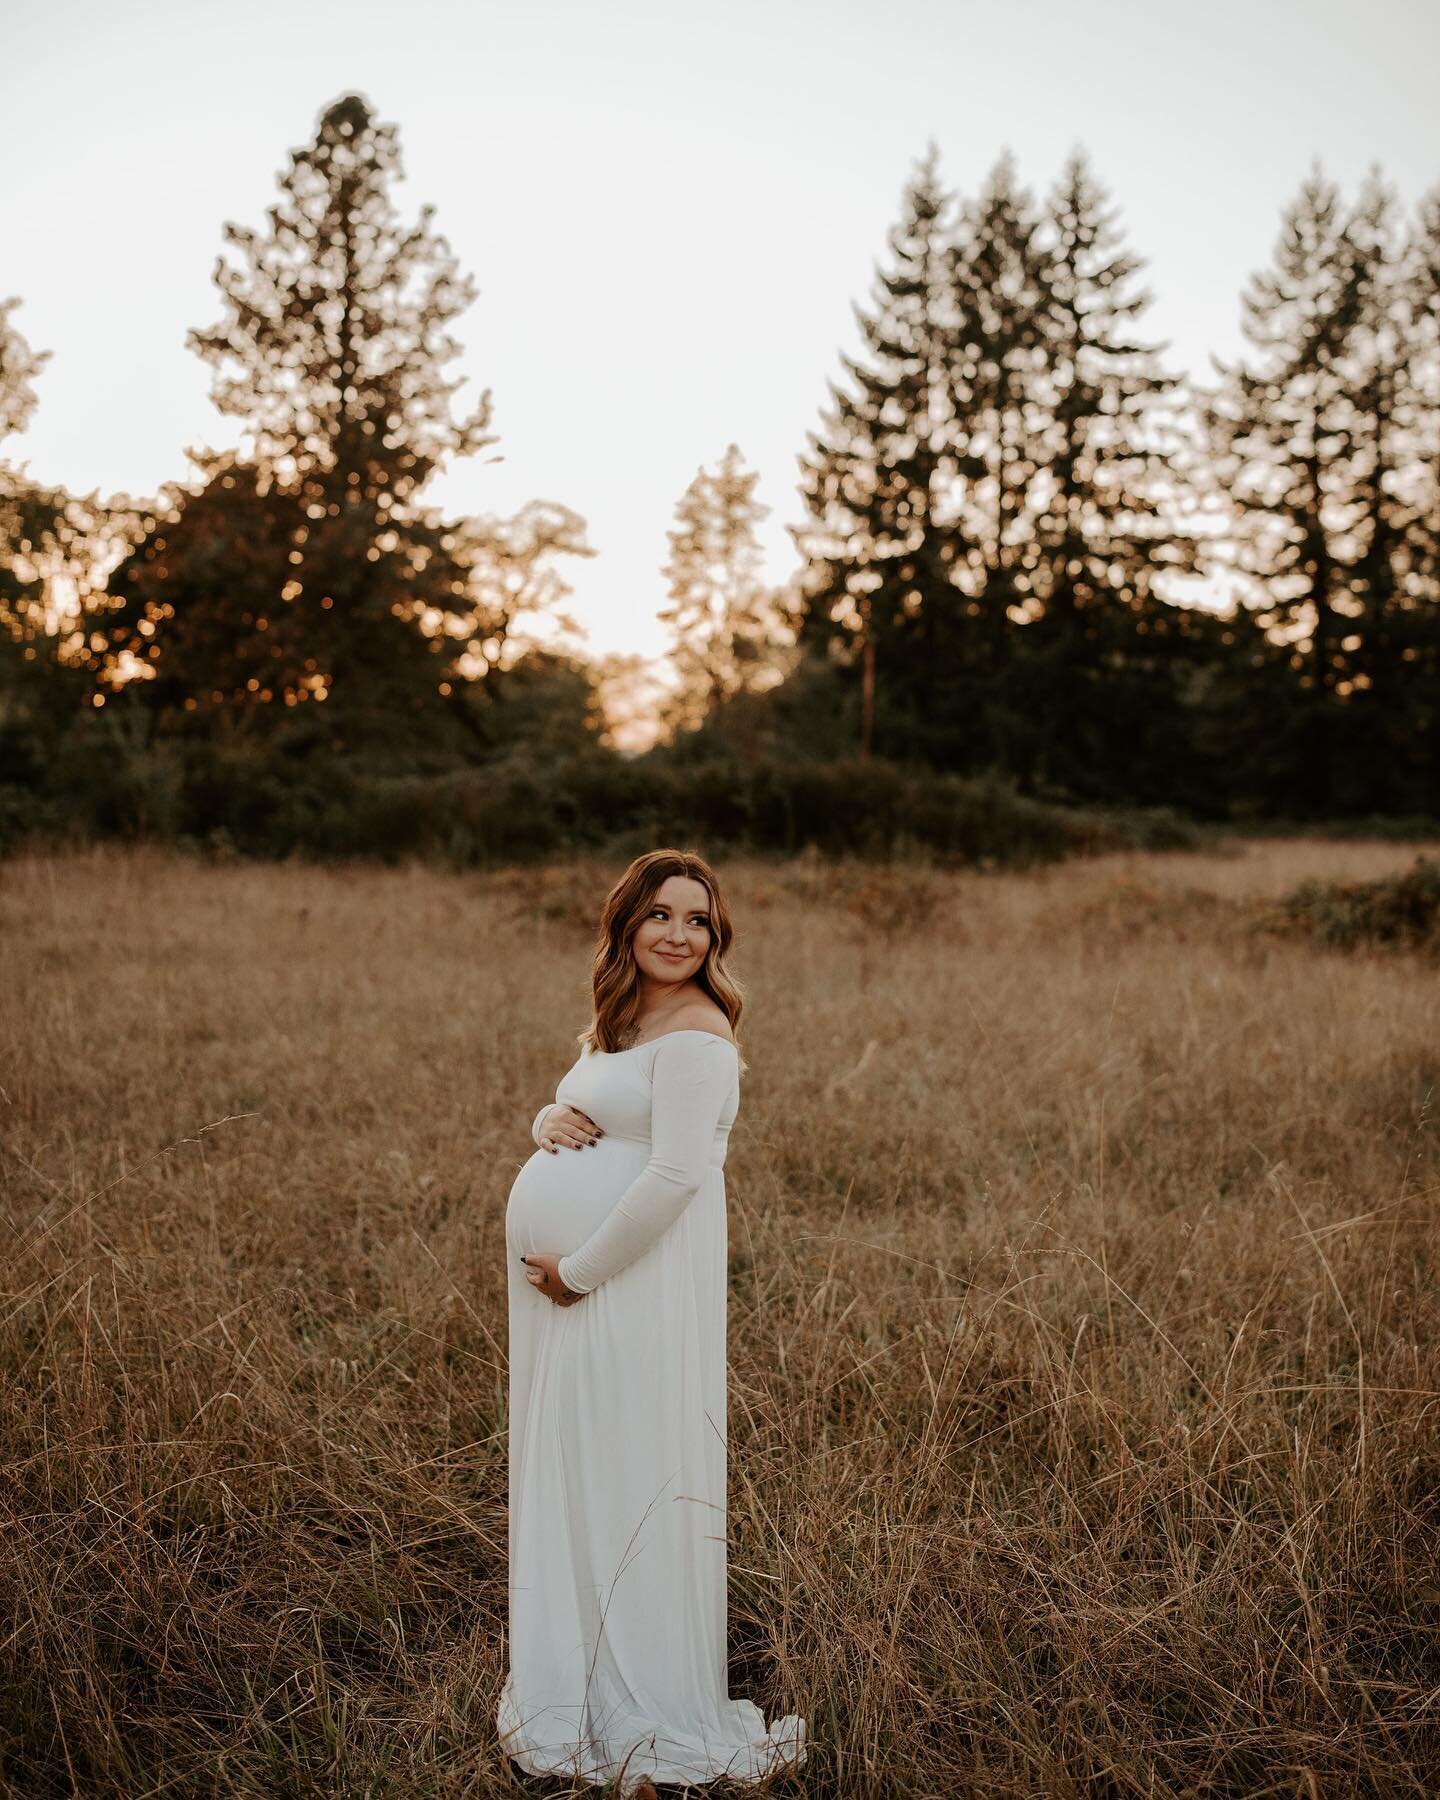 just felt like showin off a beautiful mama today😍 @jacqueline_v1  was absolutely RADIANT during her maternity session.
I love documenting glowing mamas growing their little babes